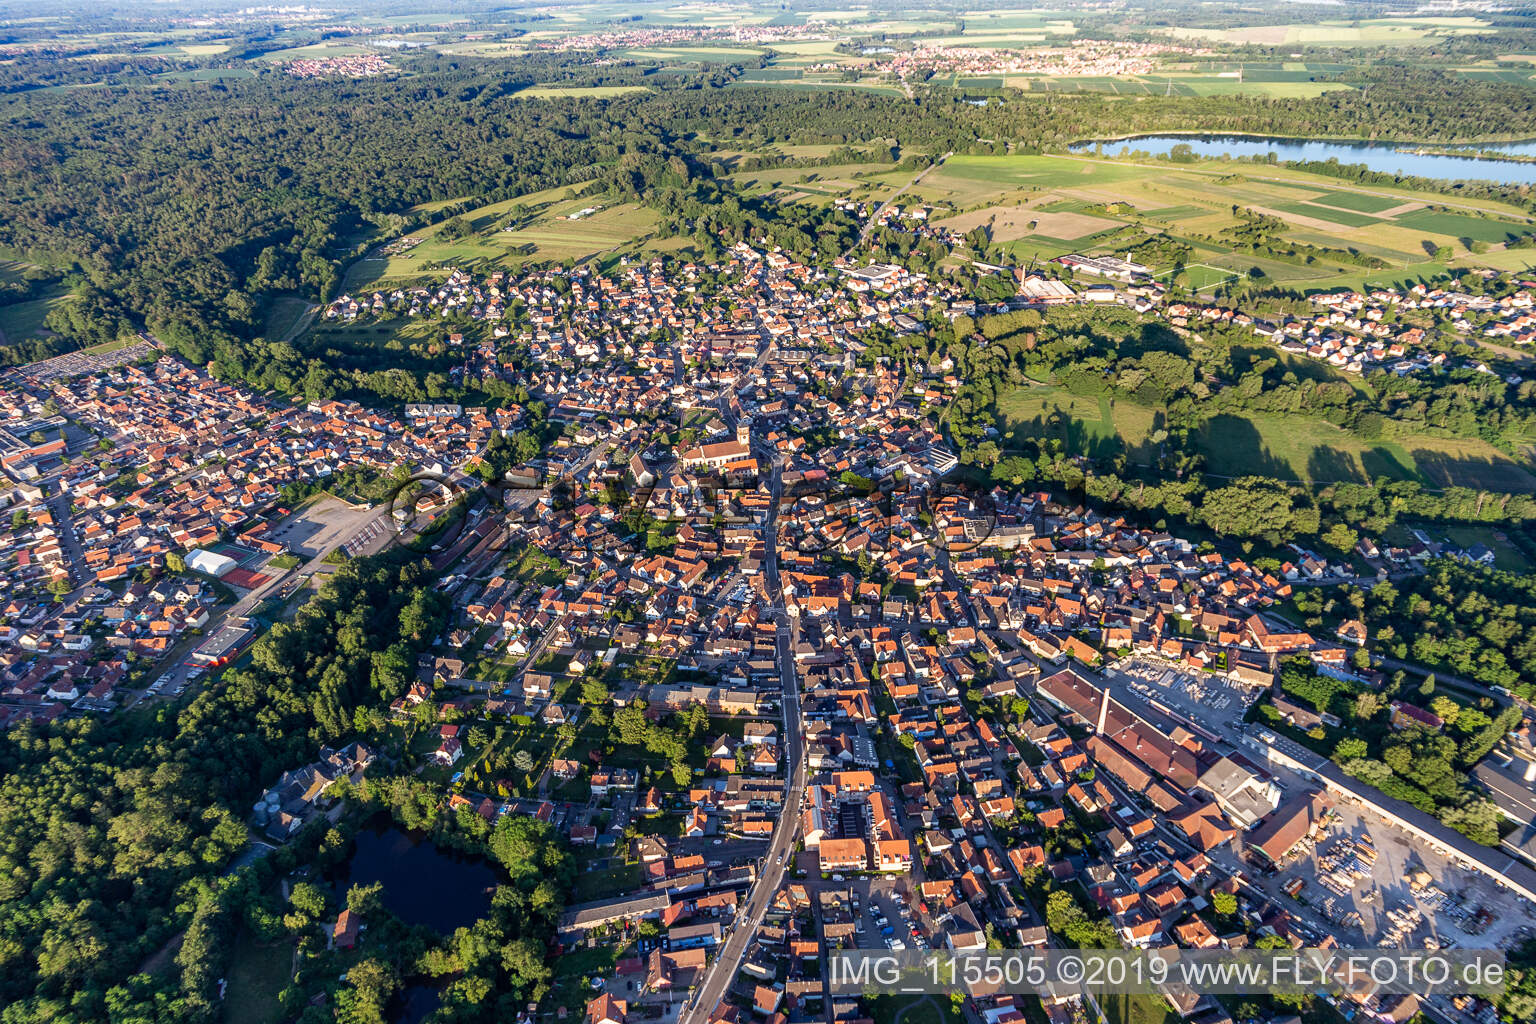 Haguenau in the state Bas-Rhin, France from the drone perspective